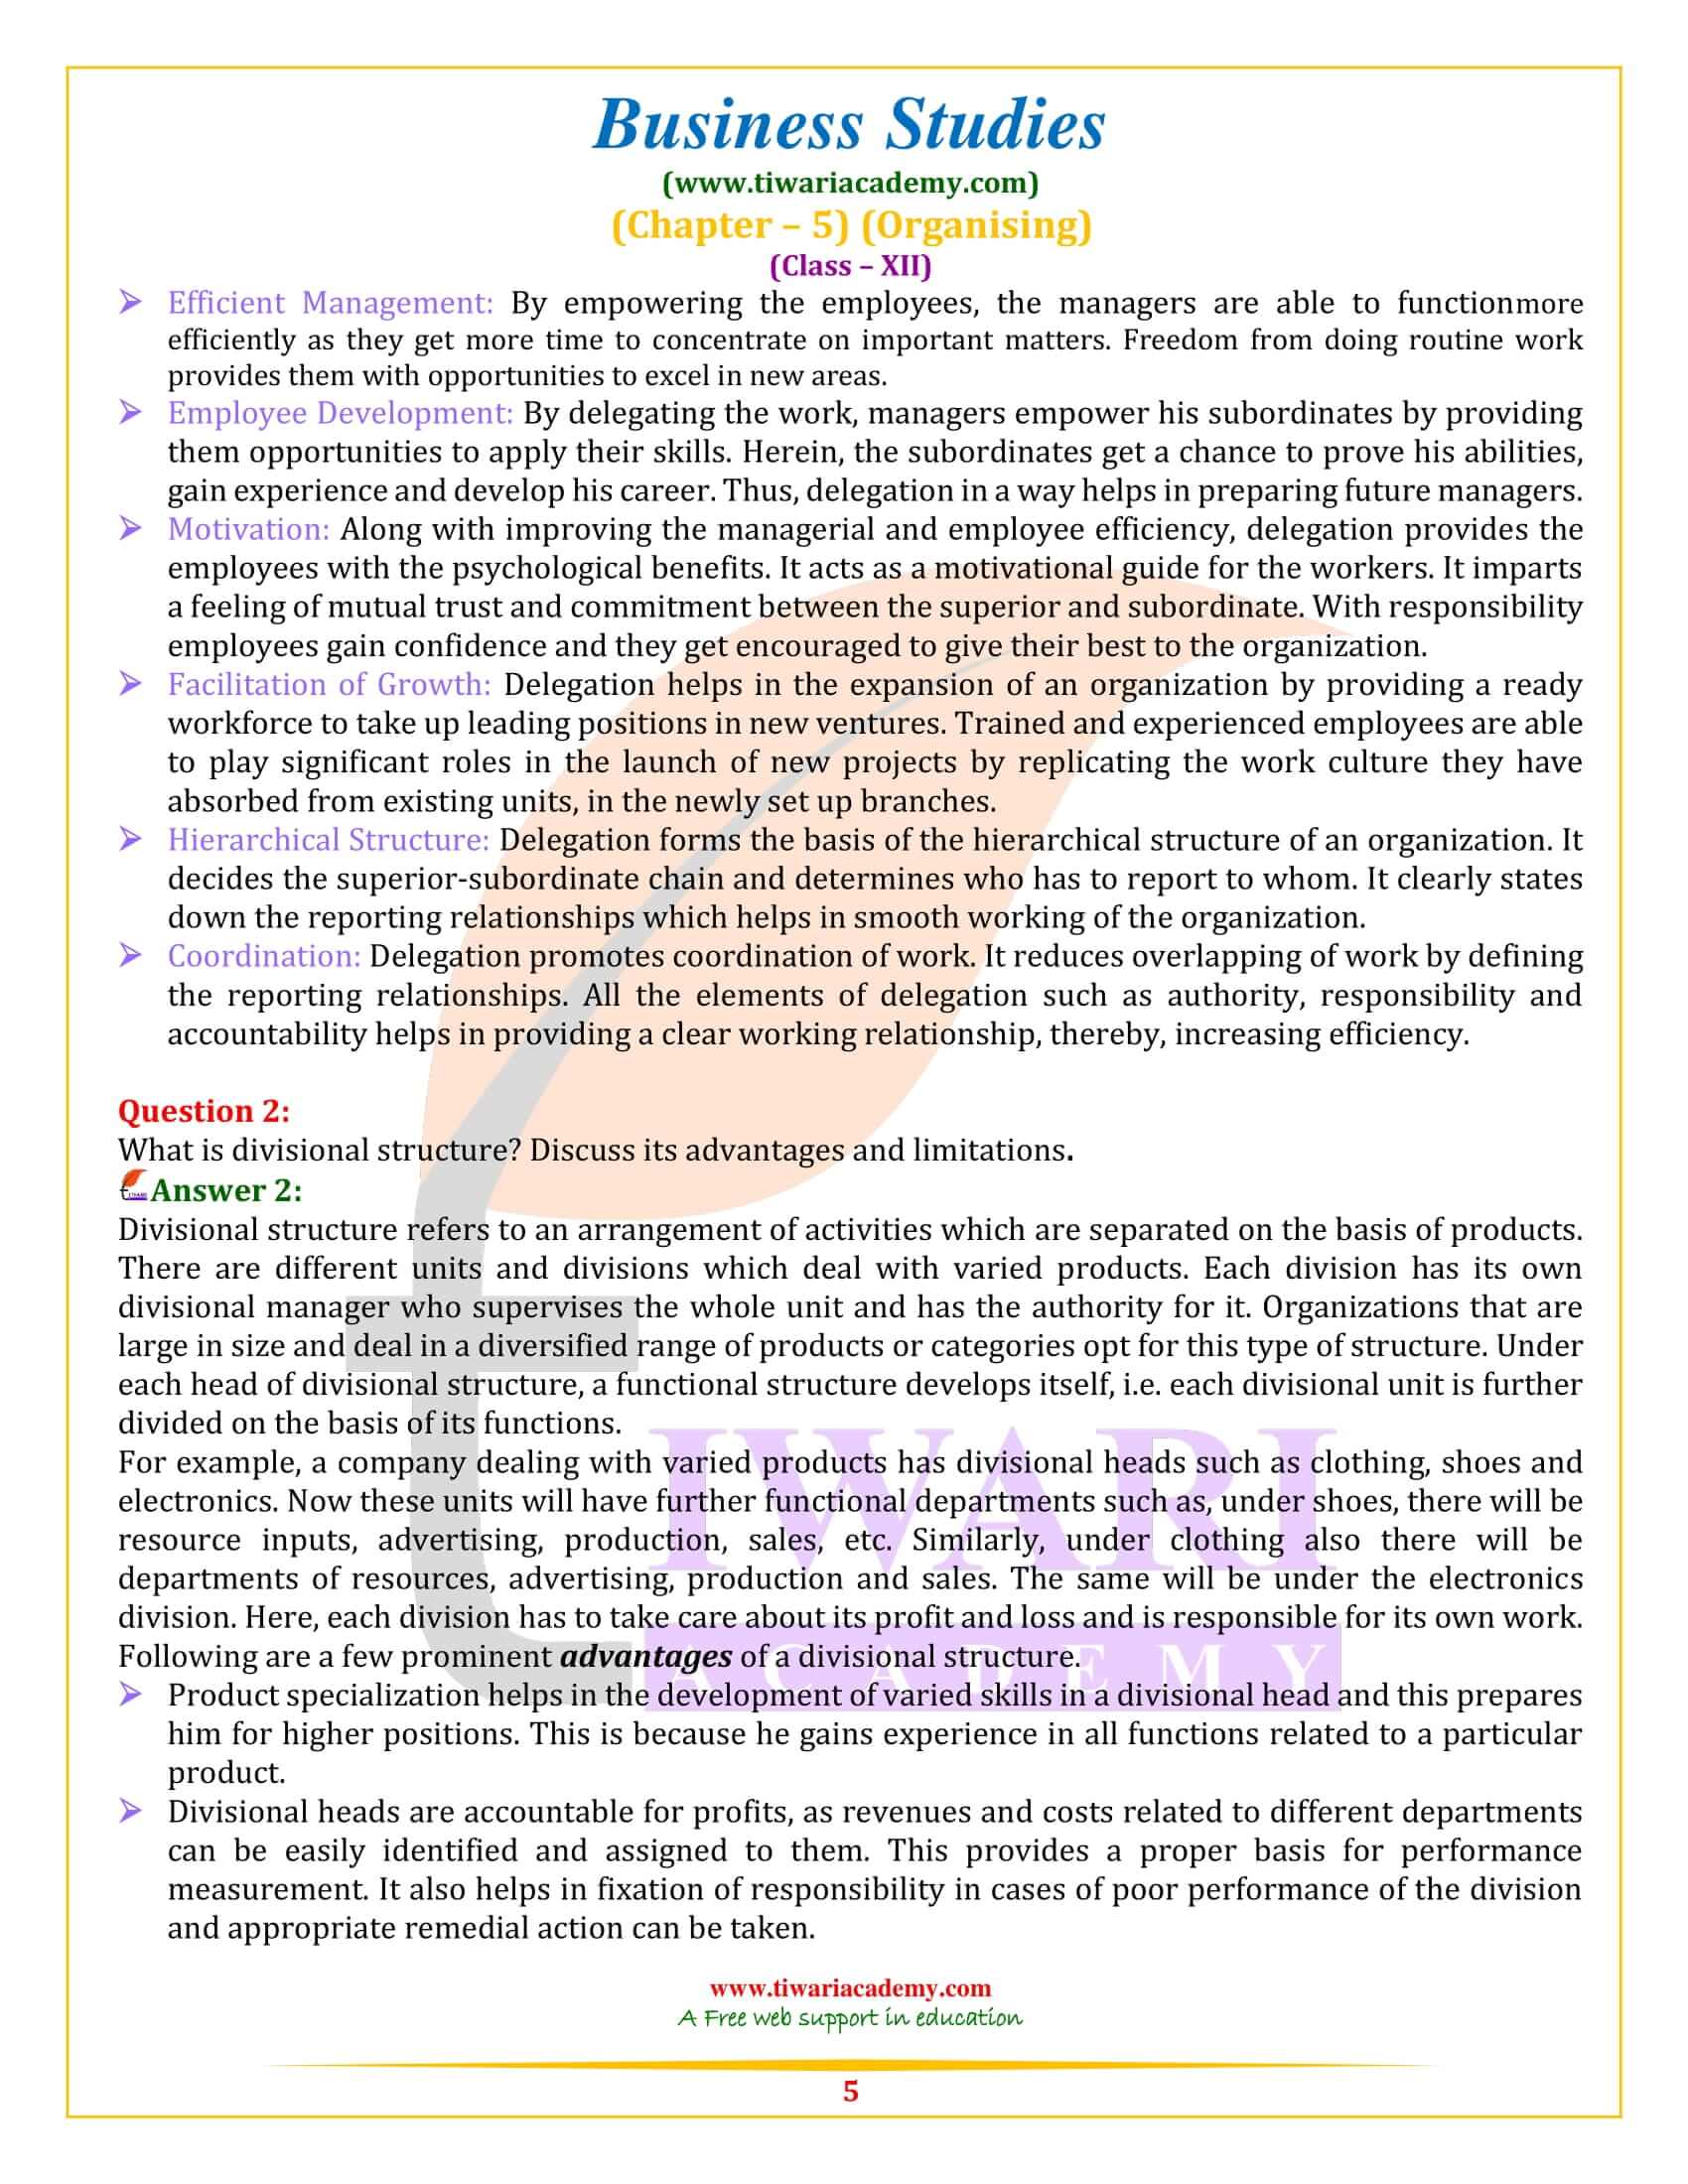 NCERT Solutions for Class 12 Business Studies Chapter 5 updated format